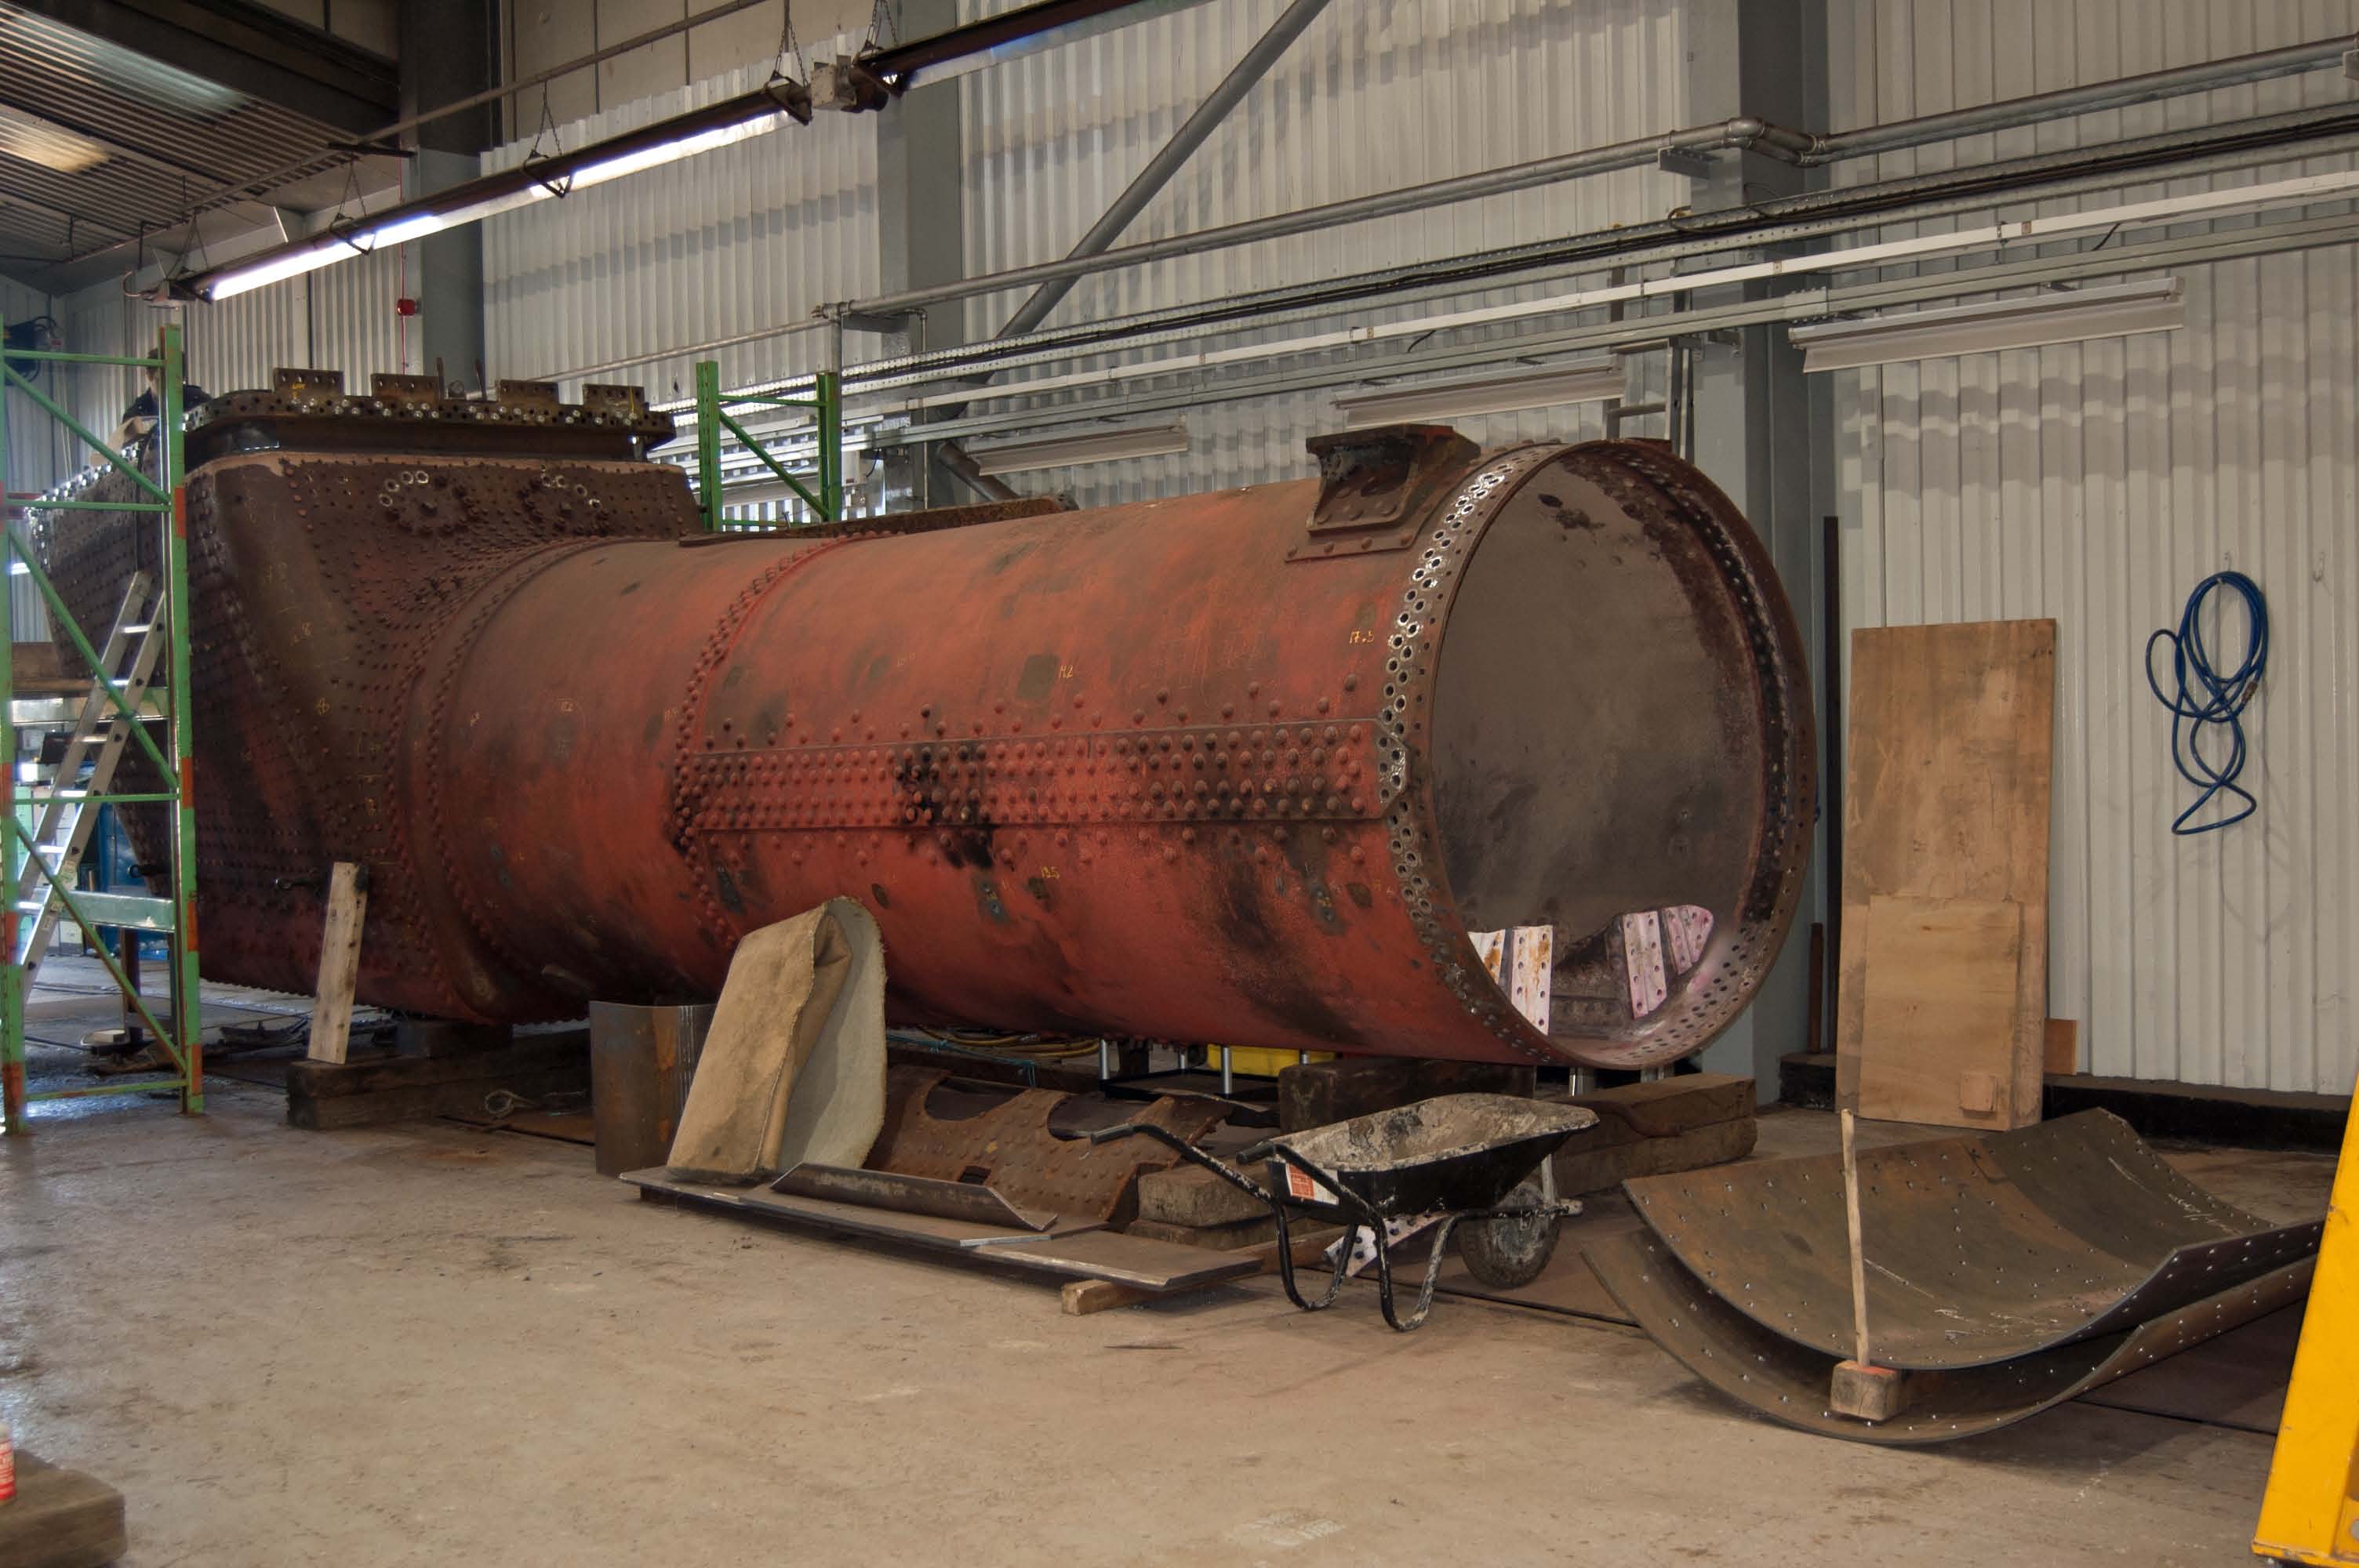 The smokebox and the old front tubeplate have been removed